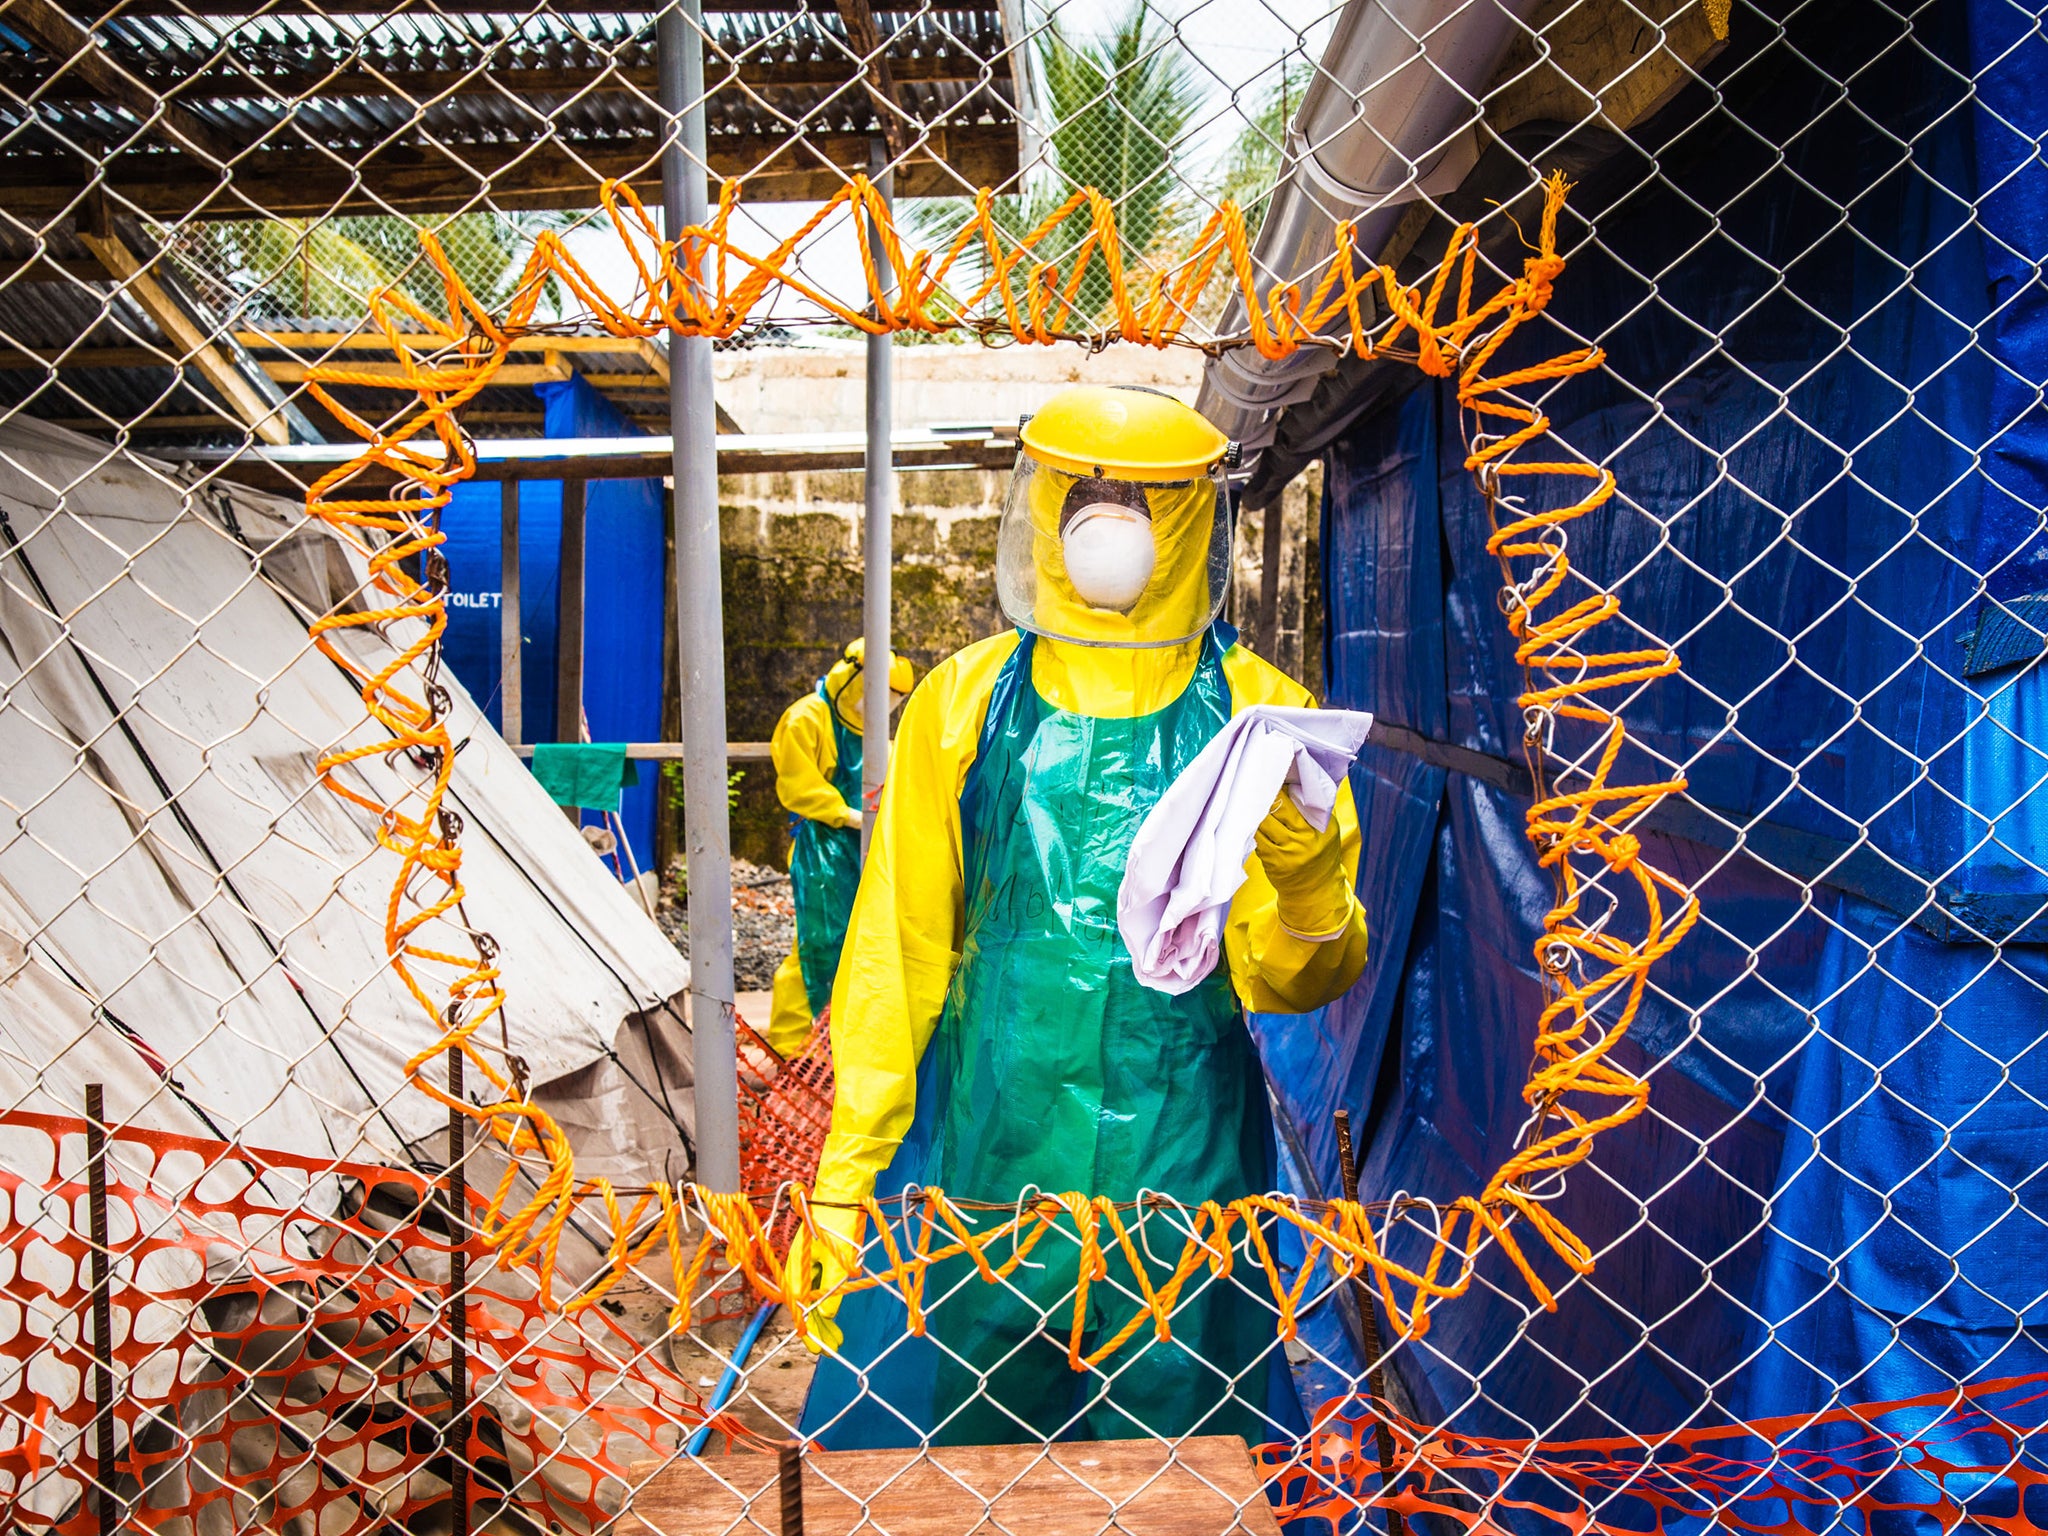 Healthcare workers in protective gear work at an Ebola treatment center in the west of Freetown, Sierra Leone